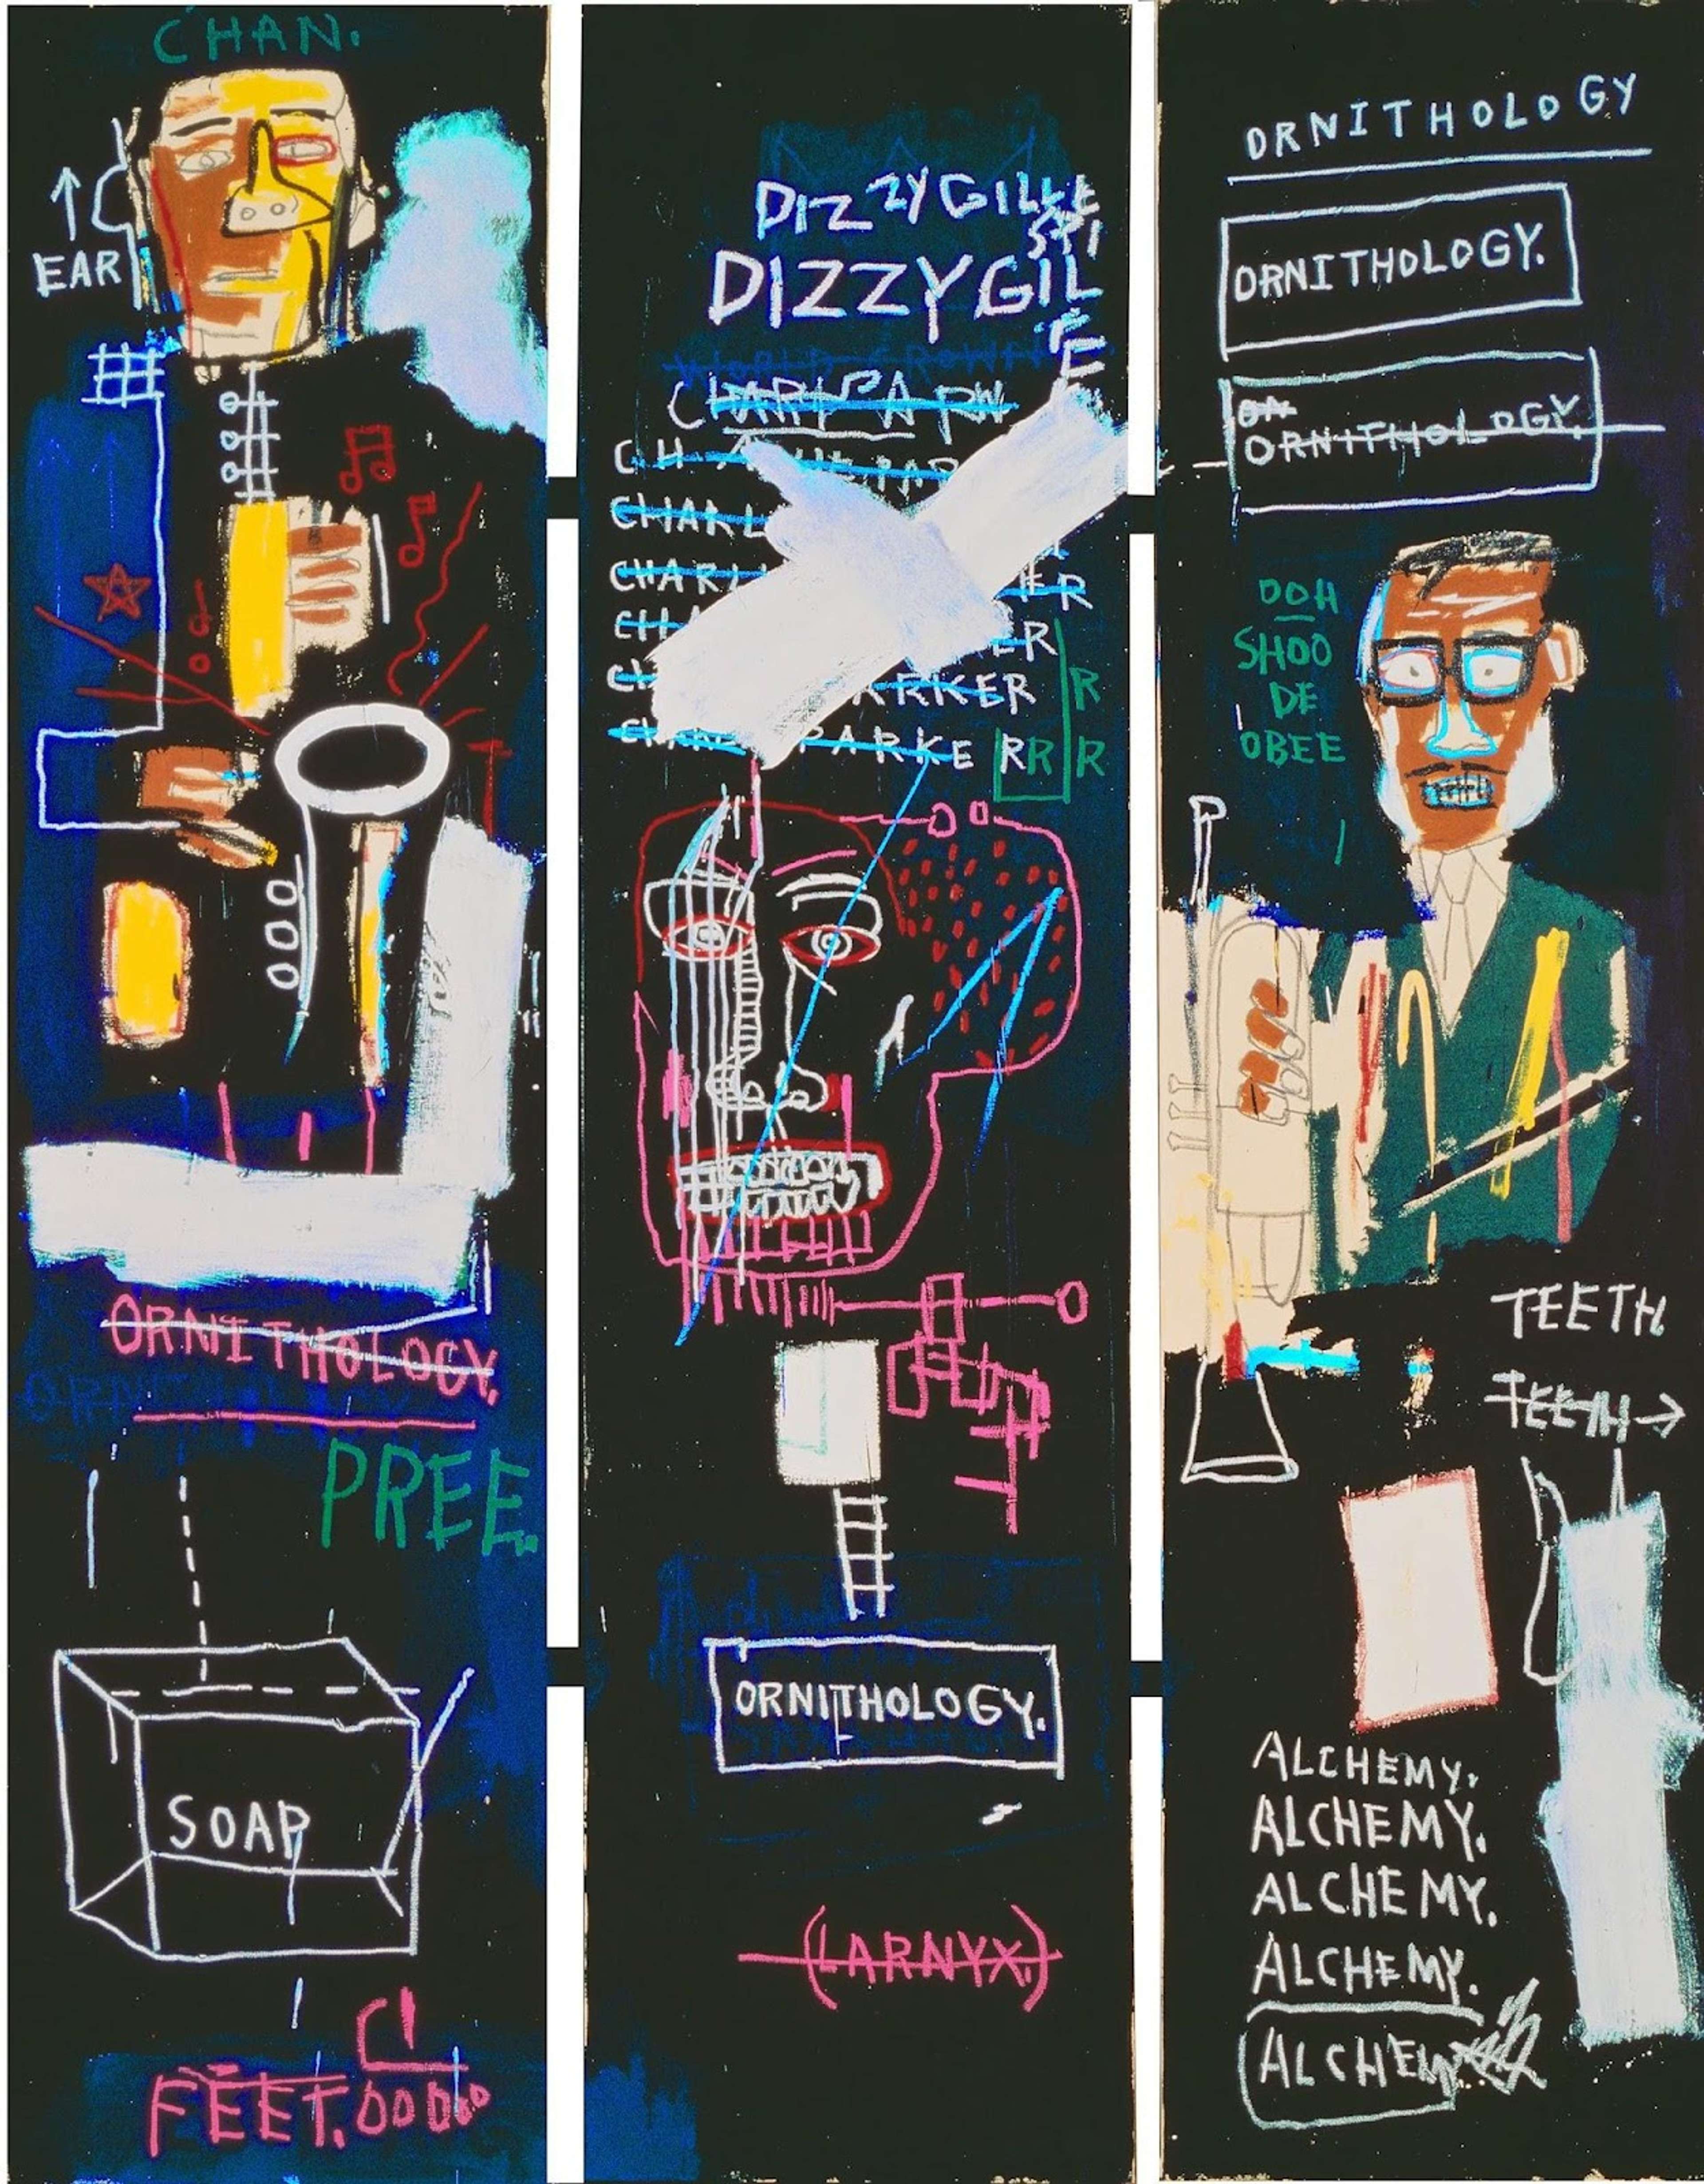 An image of the artwork Horn Players by Basquiat. It shows stylised figures, surrounded by Basquiat’s signature scribbles including medical terms. It also features many onomatopoeias, such as “Doh Shoo De Obee”.